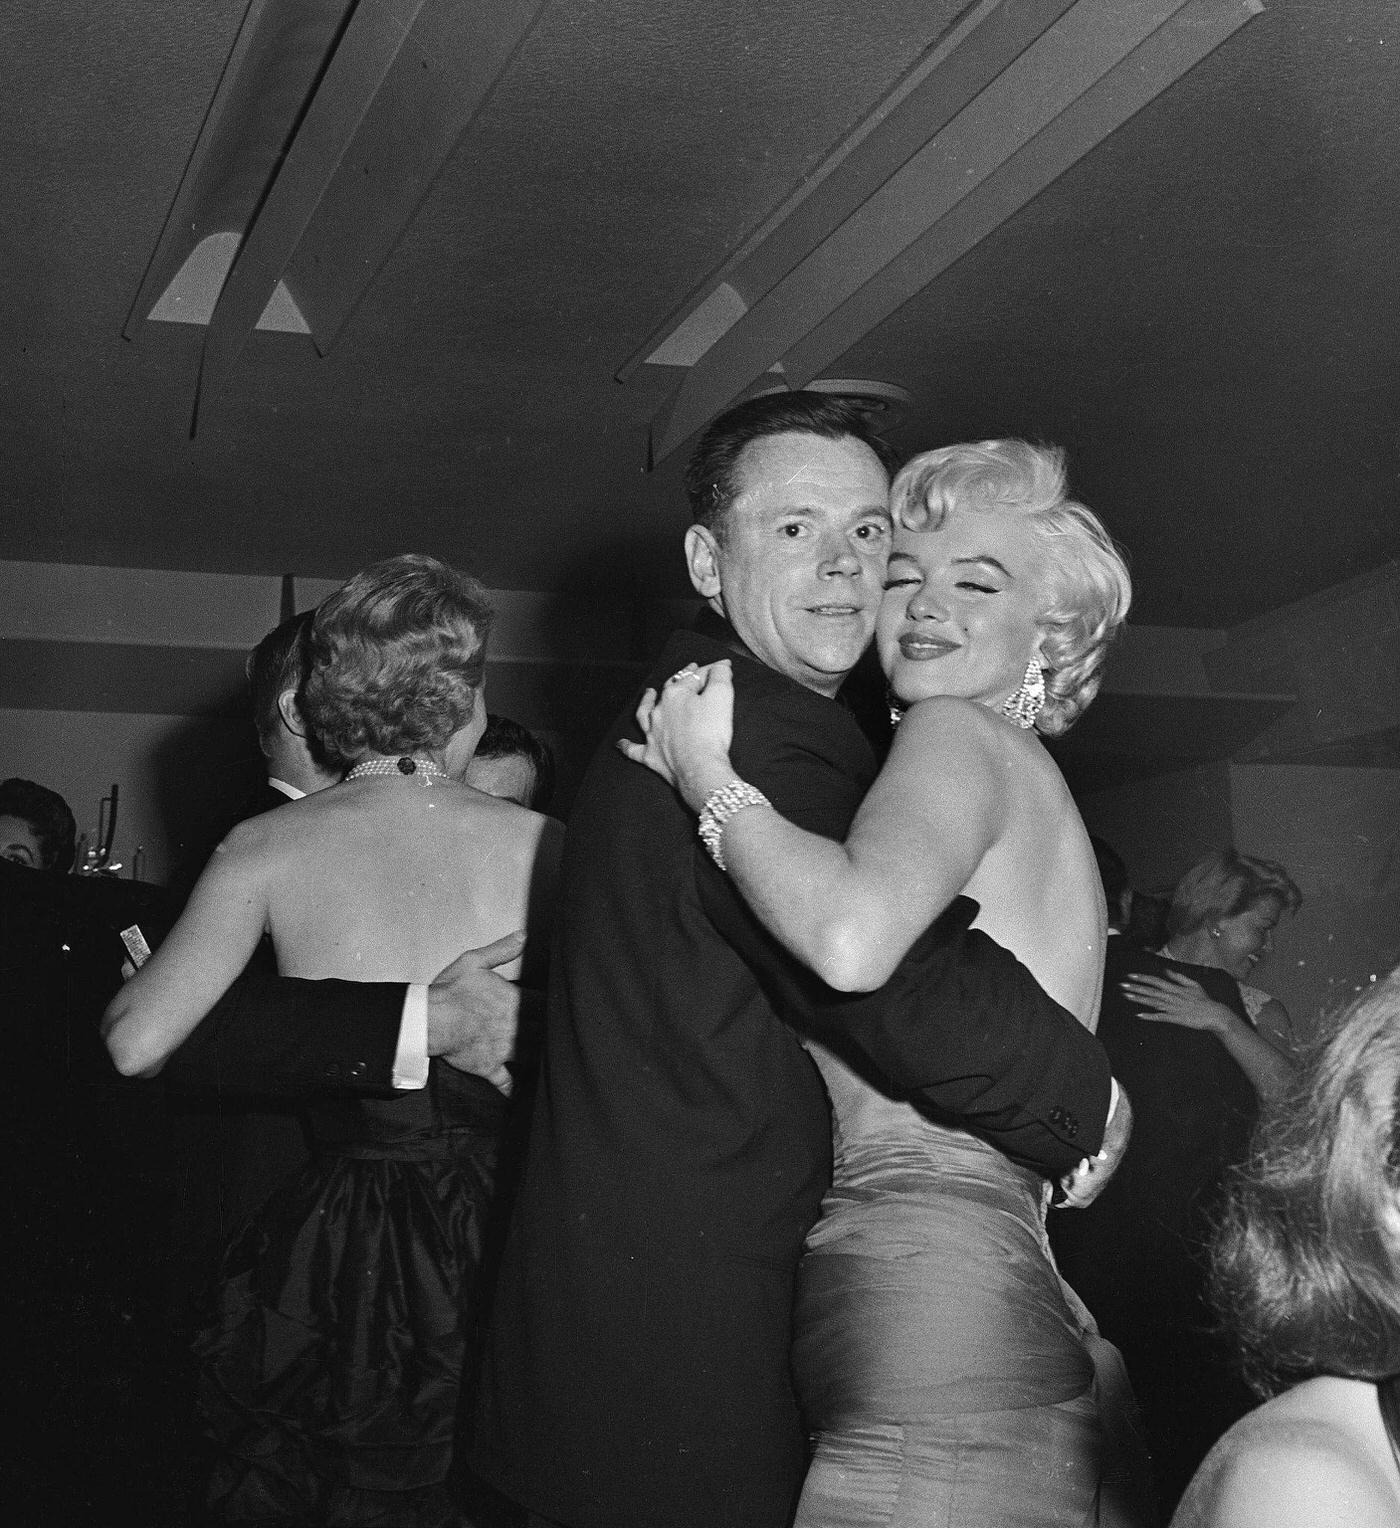 Marilyn Monroe dances with co-star Tom Ewell at the wrap party for the filming of "The Seven Year Itch" at Romanoff's Restaurant in 1954